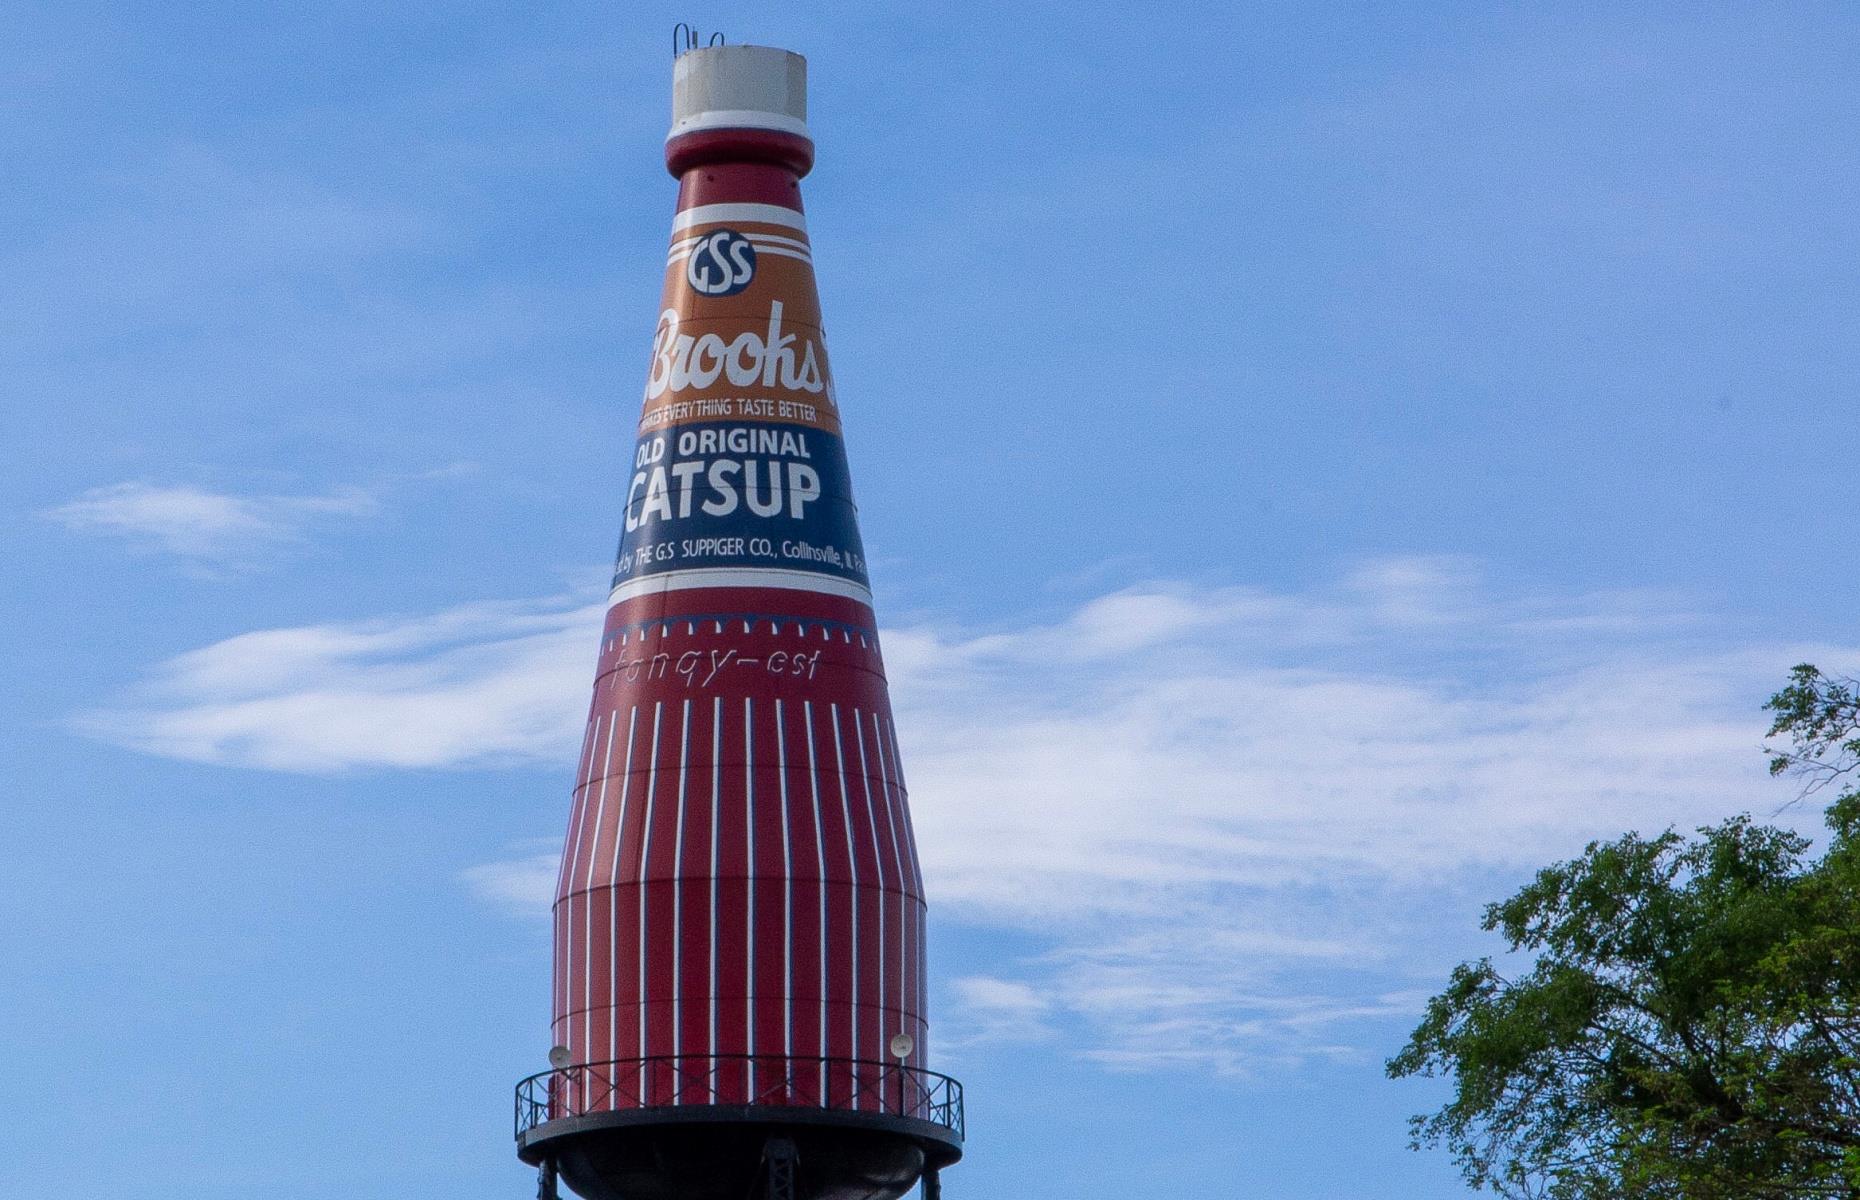 <p>The <a href="https://www.catsupbottle.com/index.html">world’s largest catsup</a> (or ketchup) bottle doesn’t feature a Heinz label, but is a monument to Brooks Catsup, which was originally produced in Collinsville (and is now made in Canada). The tower was built in 1949 to supply water to the Brooks plant. The tower fell into disrepair but was restored in the 1990s and is now considered a premium example of an American roadside attraction. Despite the rumors, it (probably) isn’t actually filled with ketchup.</p>